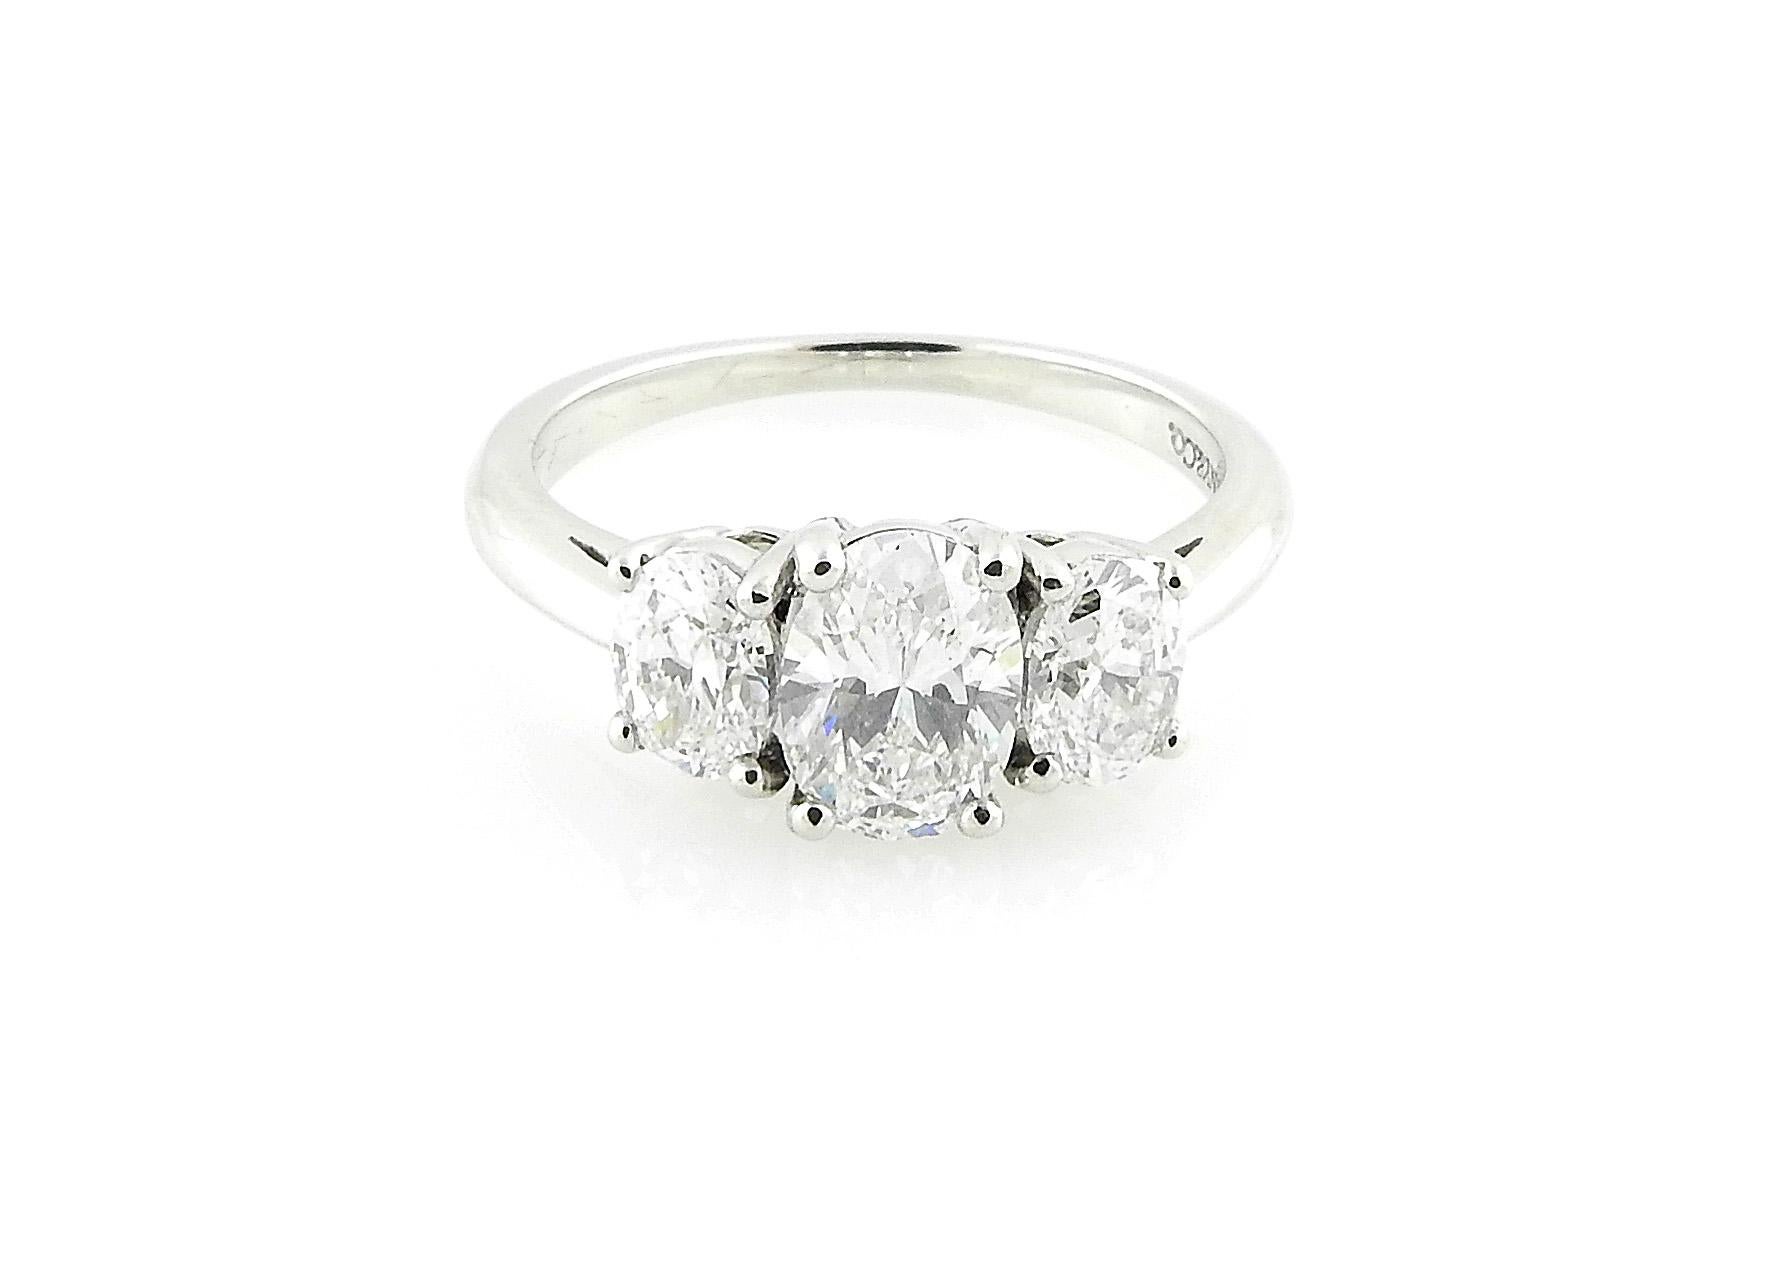 Tiffany & Co. Platinum Engagement Ring

Everything you will need to present the perfect Tiffany & Co. engagement ring is included with this gorgeous ring!

This stunning Tiffany & Co. engagement ring is set in platinum. 3 oval diamonds are each set